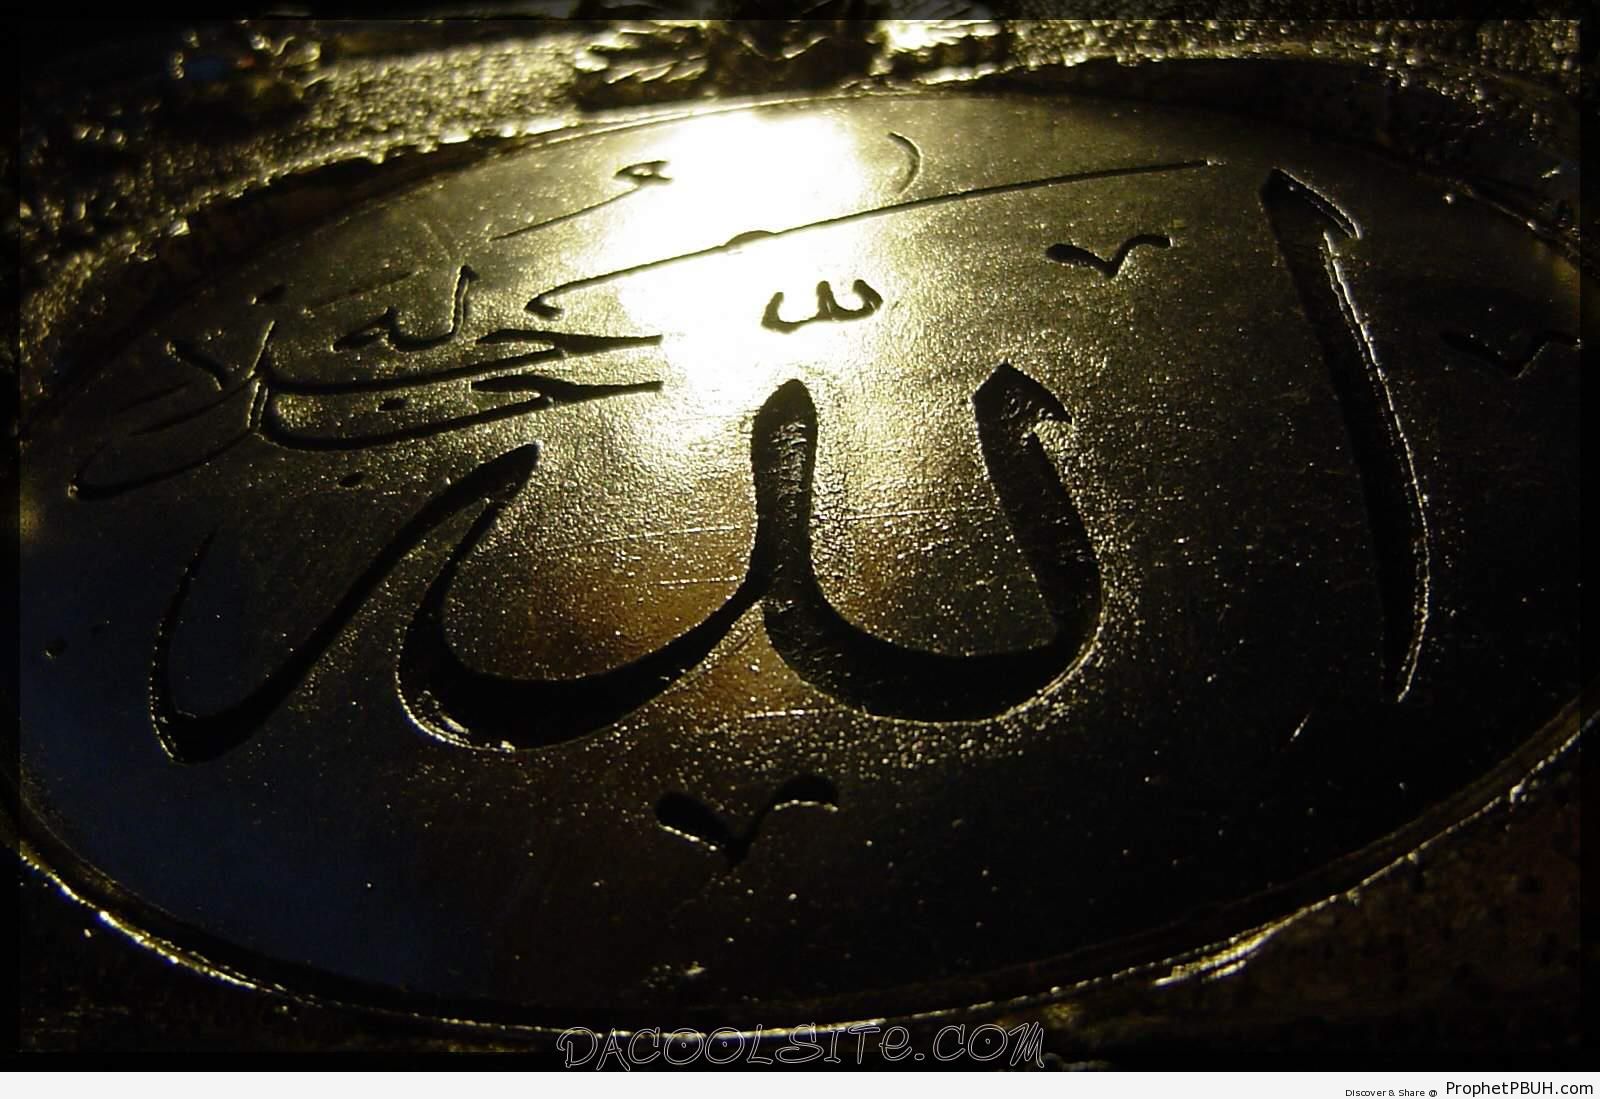 Allah Calligraphy Engraved on Metal With Specular Highlight - Allah Calligraphy and Typography 